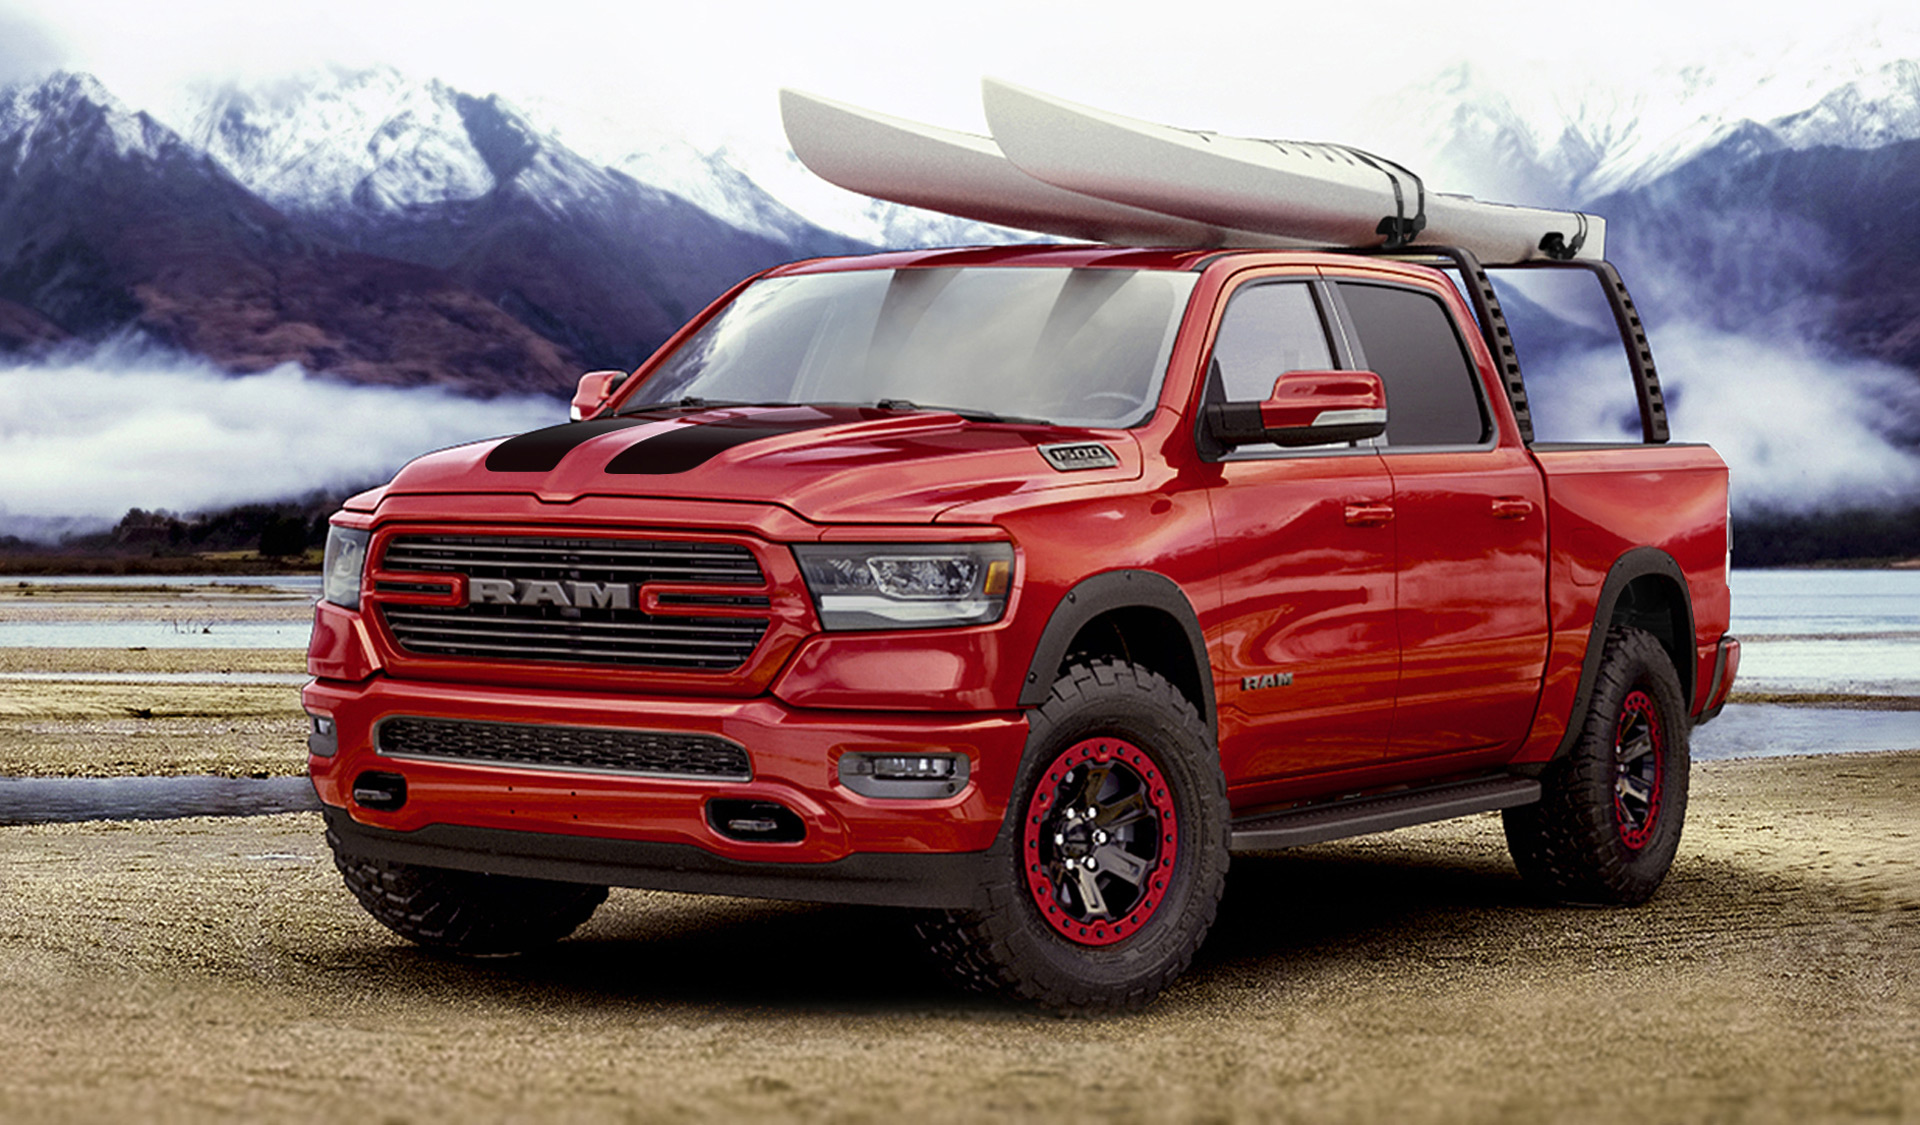 2019 Ram 1500 gets Moparized at 2018 Chicago Auto Show